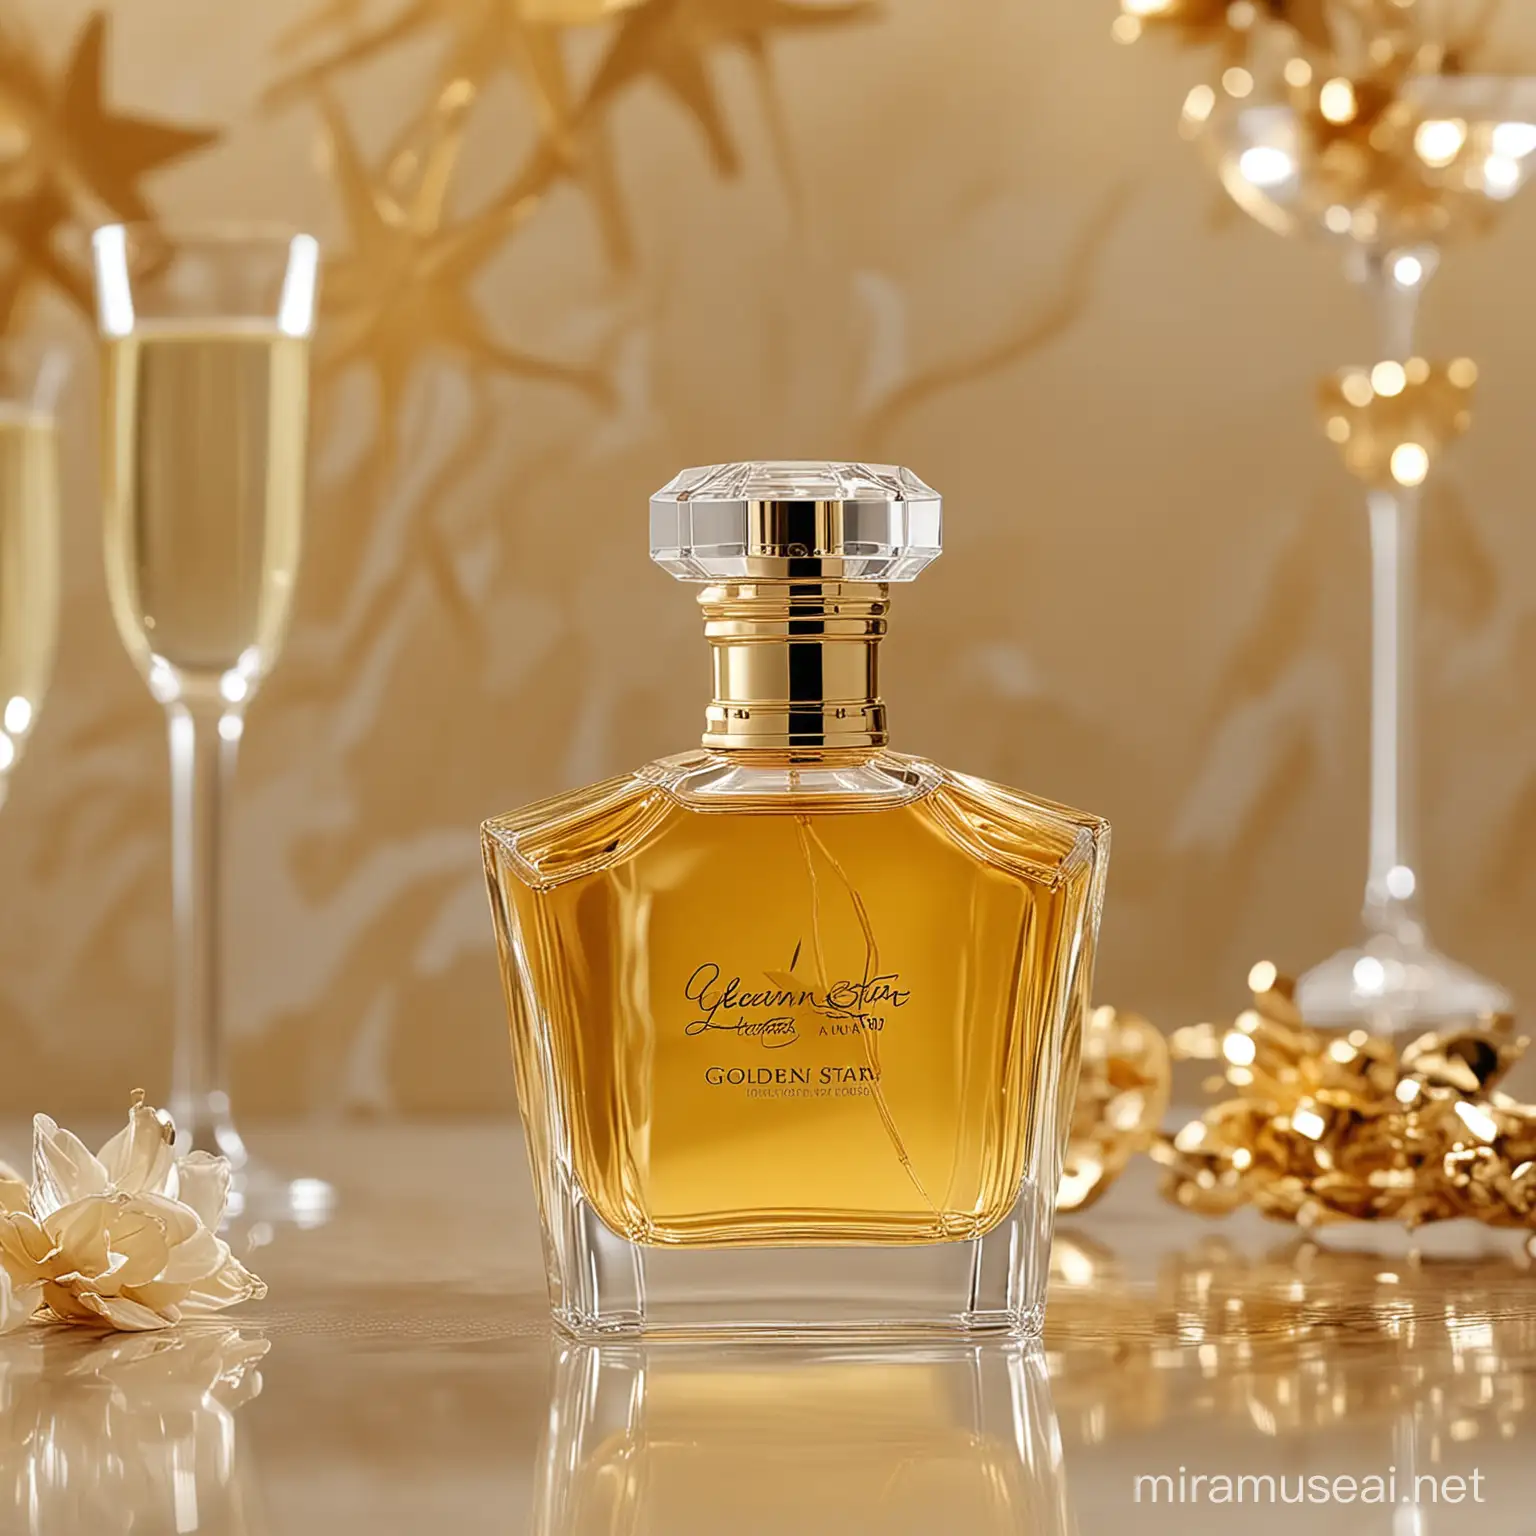 a luxury bottle of perfume from Gleam called Golden Star with a background of champagne